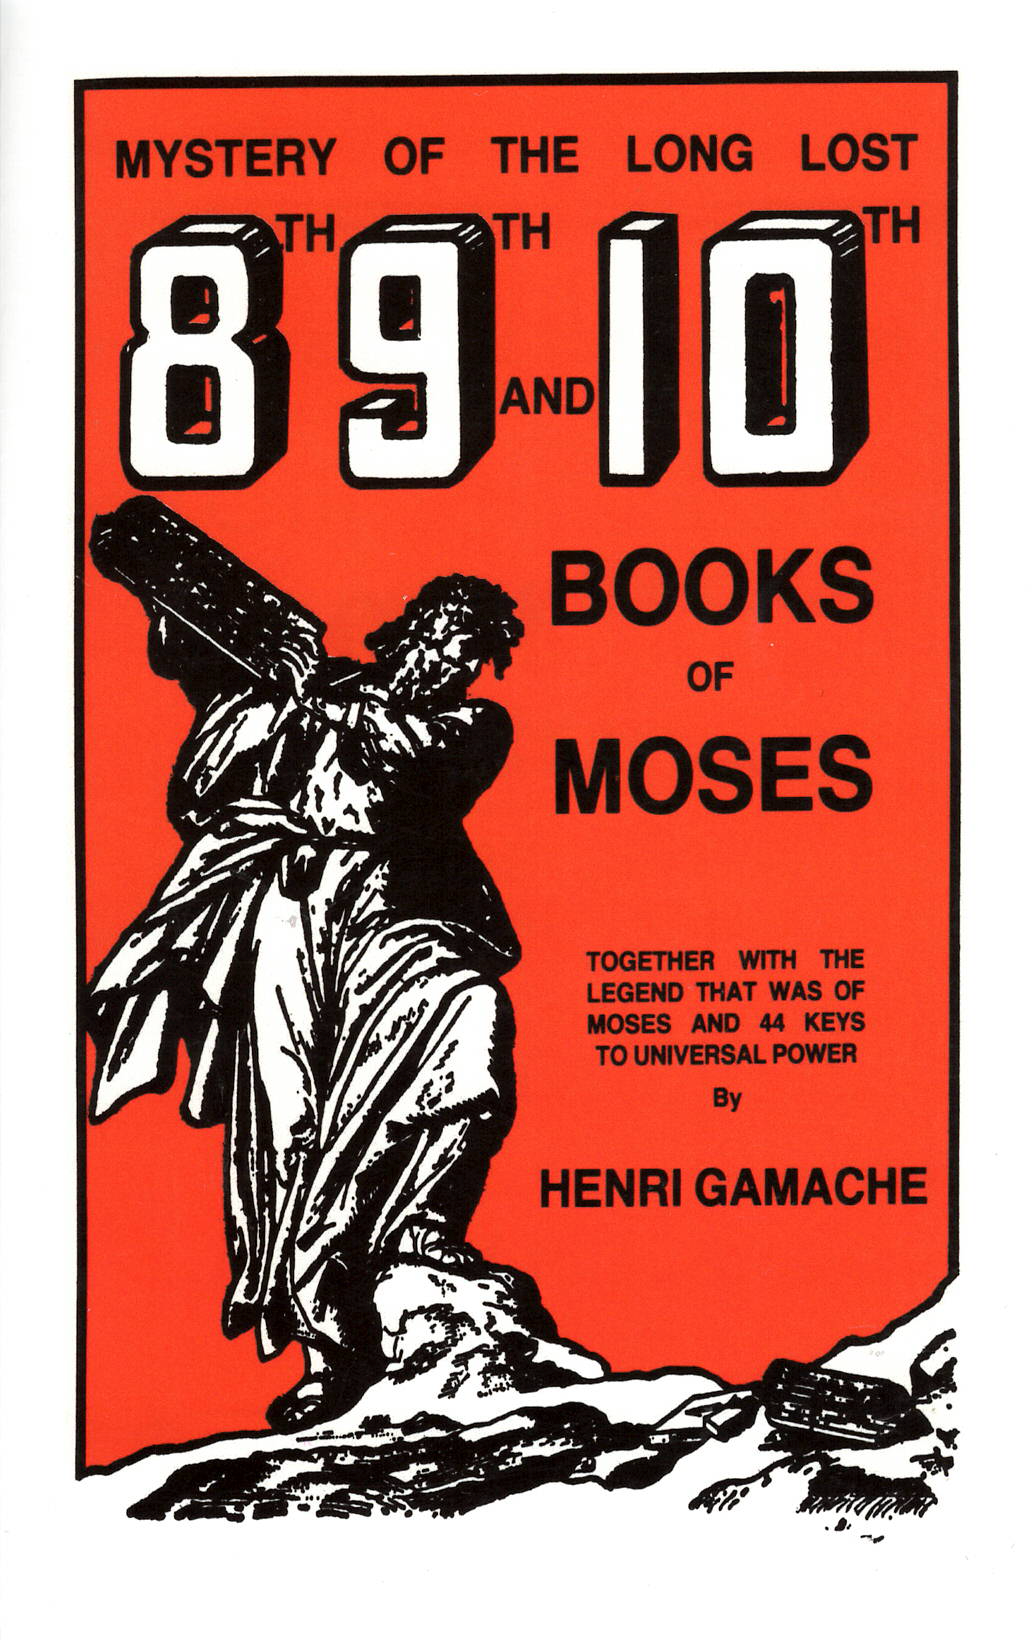 The 8th 9th and 10th Books of Moses